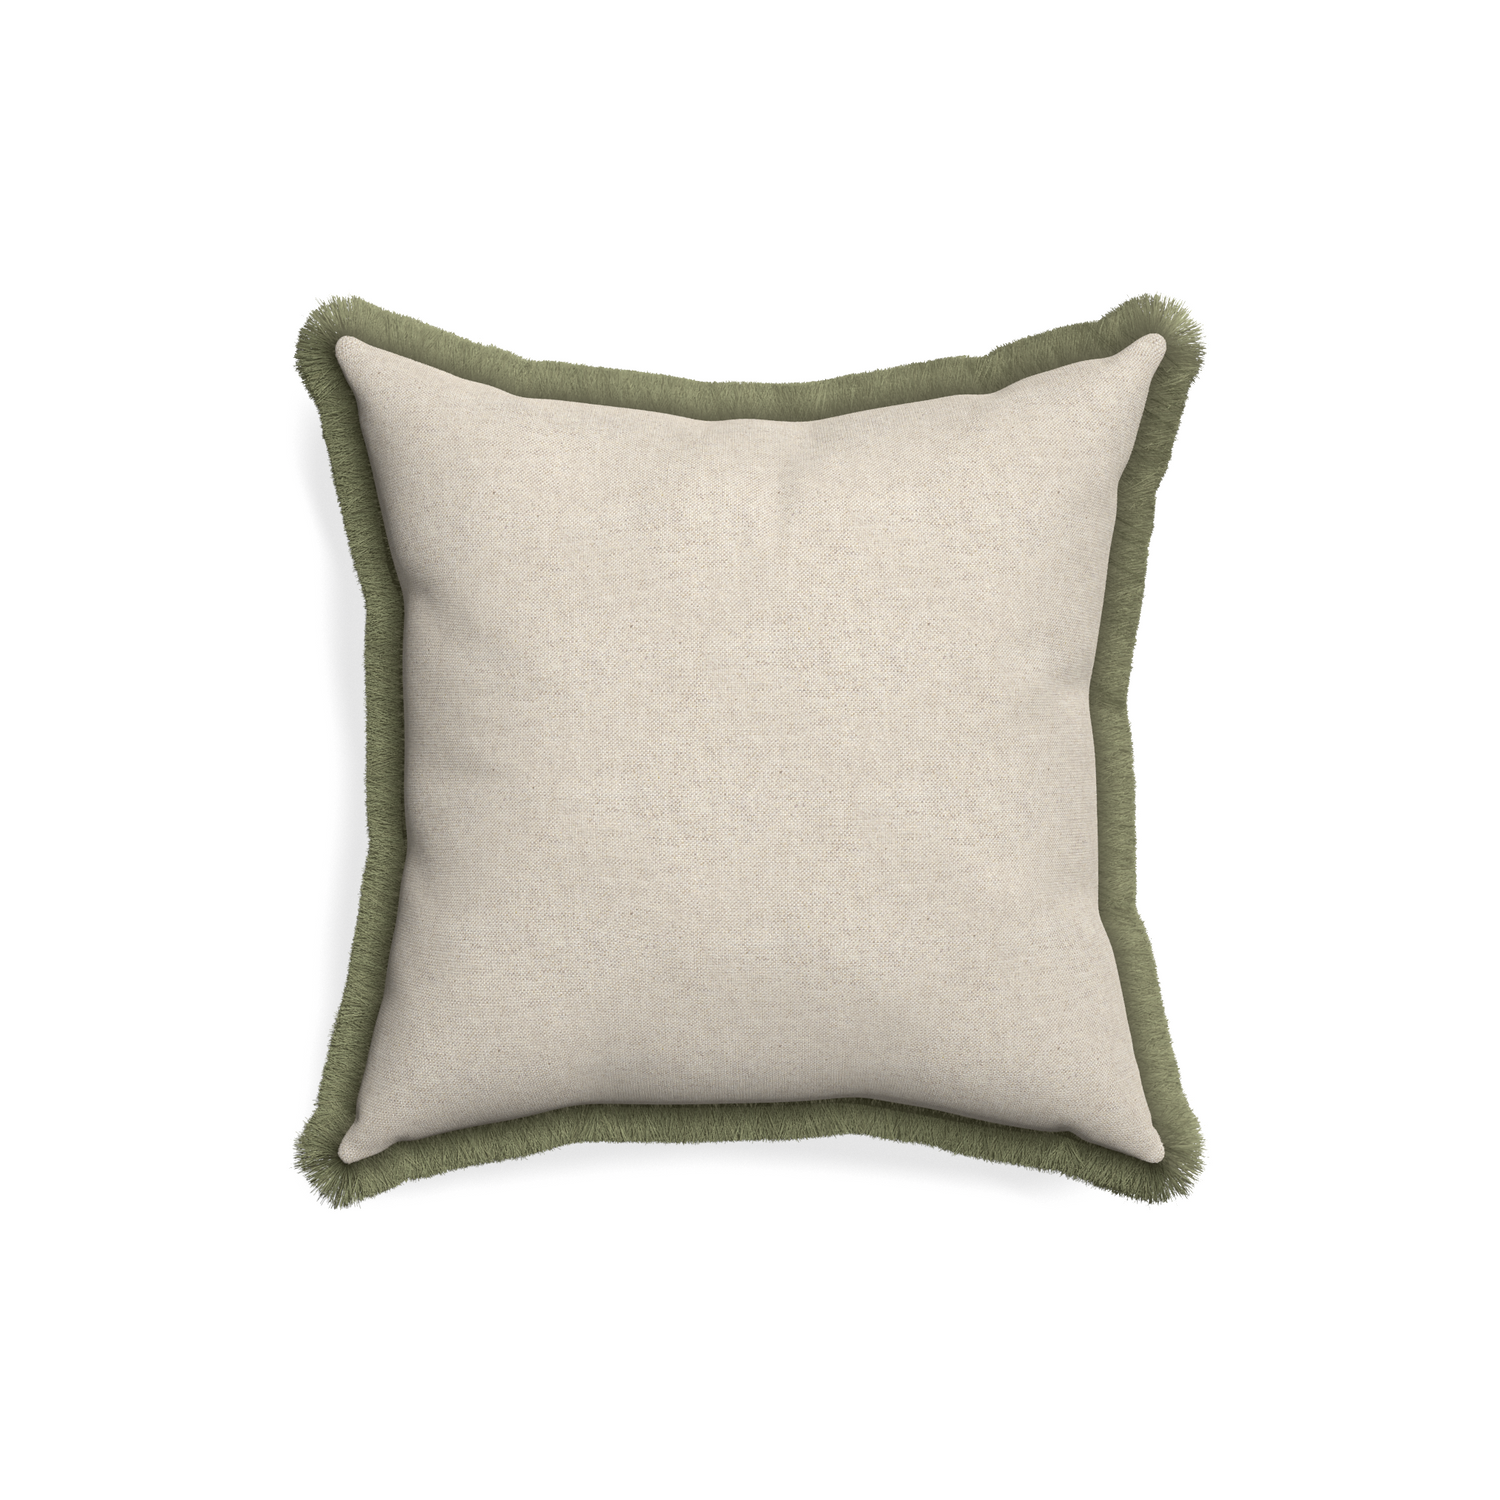 18-square oat custom light brownpillow with sage fringe on white background